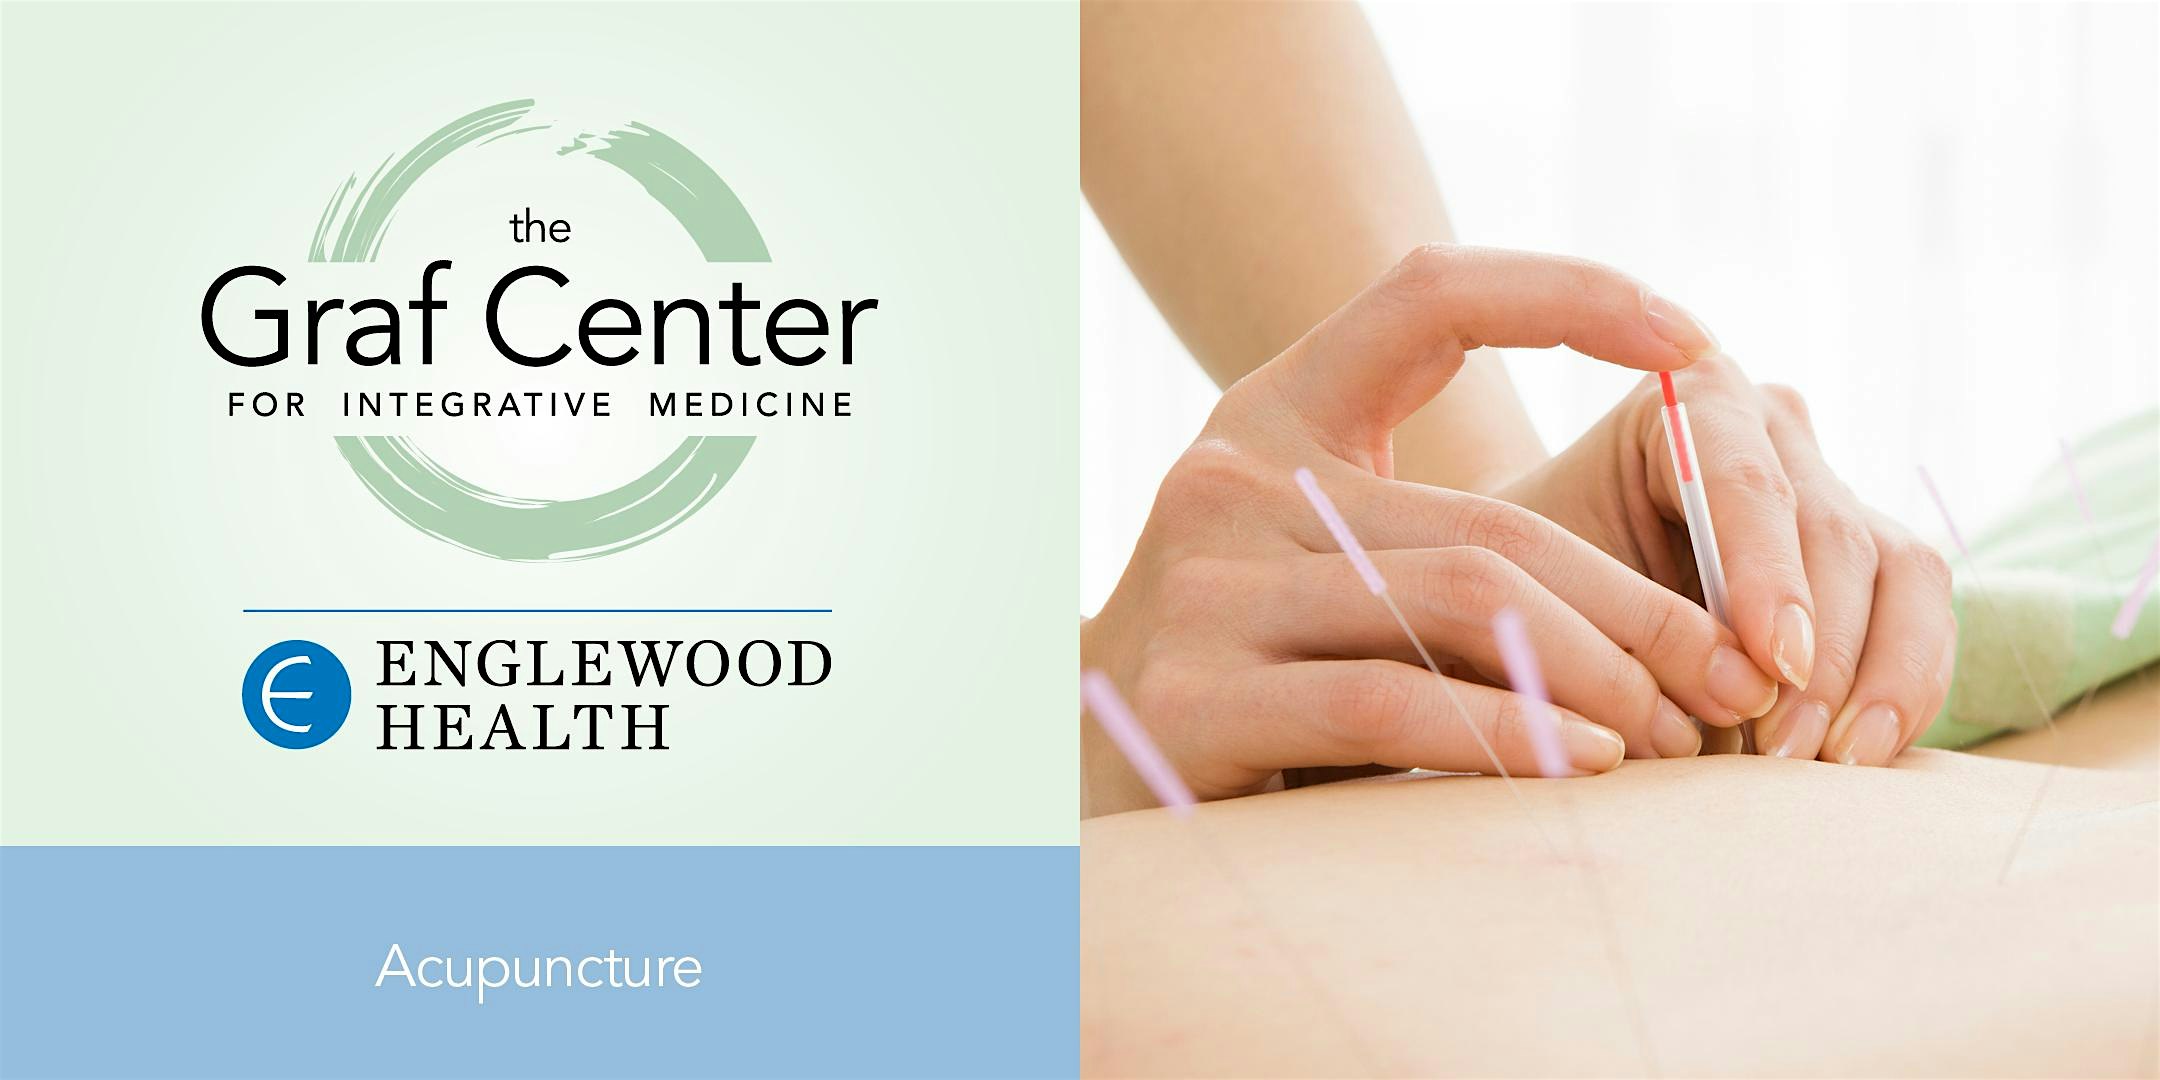 More info: Acupuncture for Pain Management